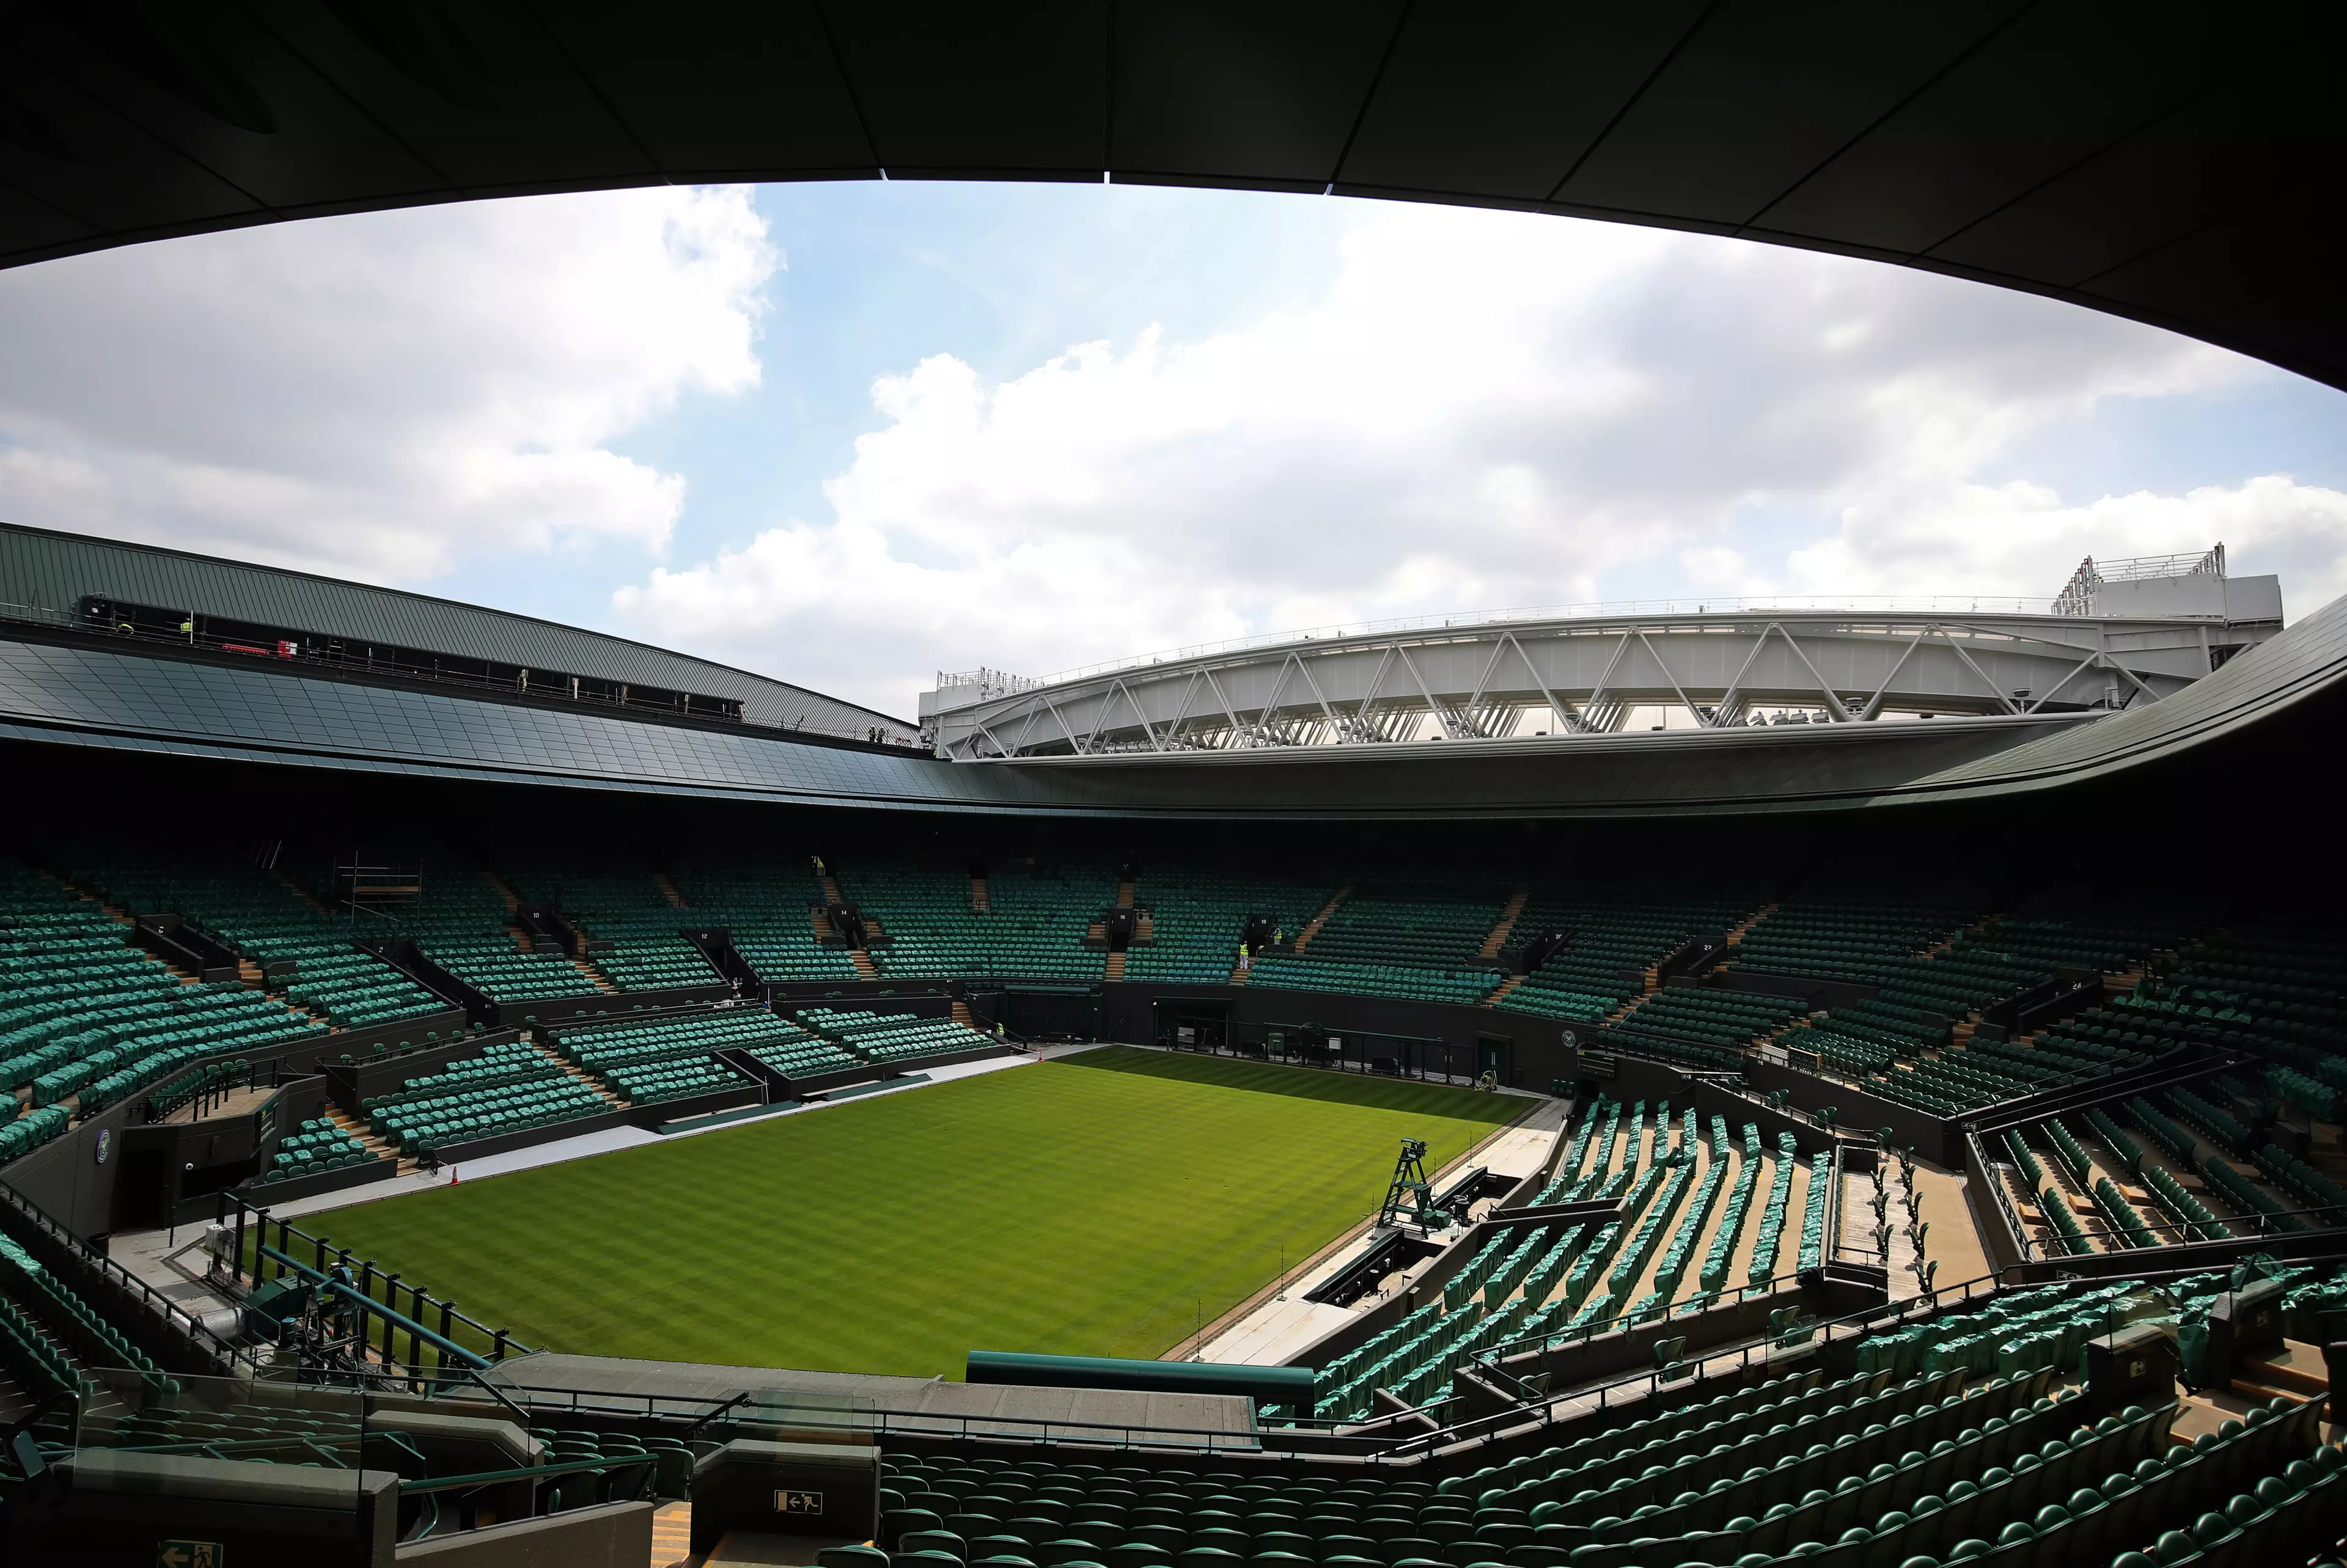 Court One with its new roof. Image: PA Images